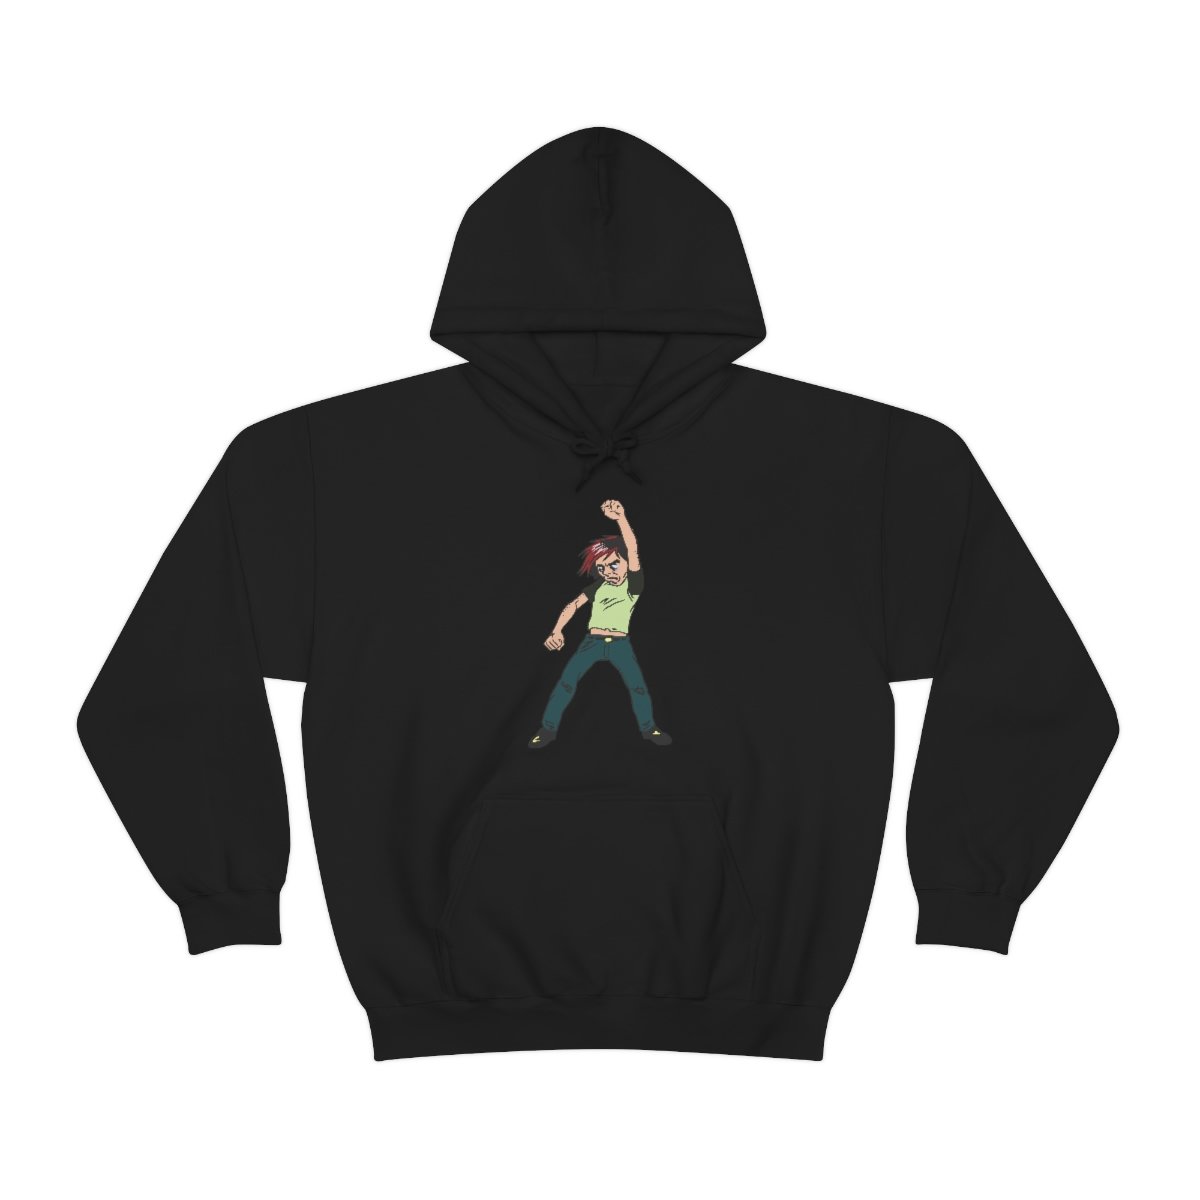 Heaven’s Metal Pit Moves Windmill Pullover Hooded Sweatshirt